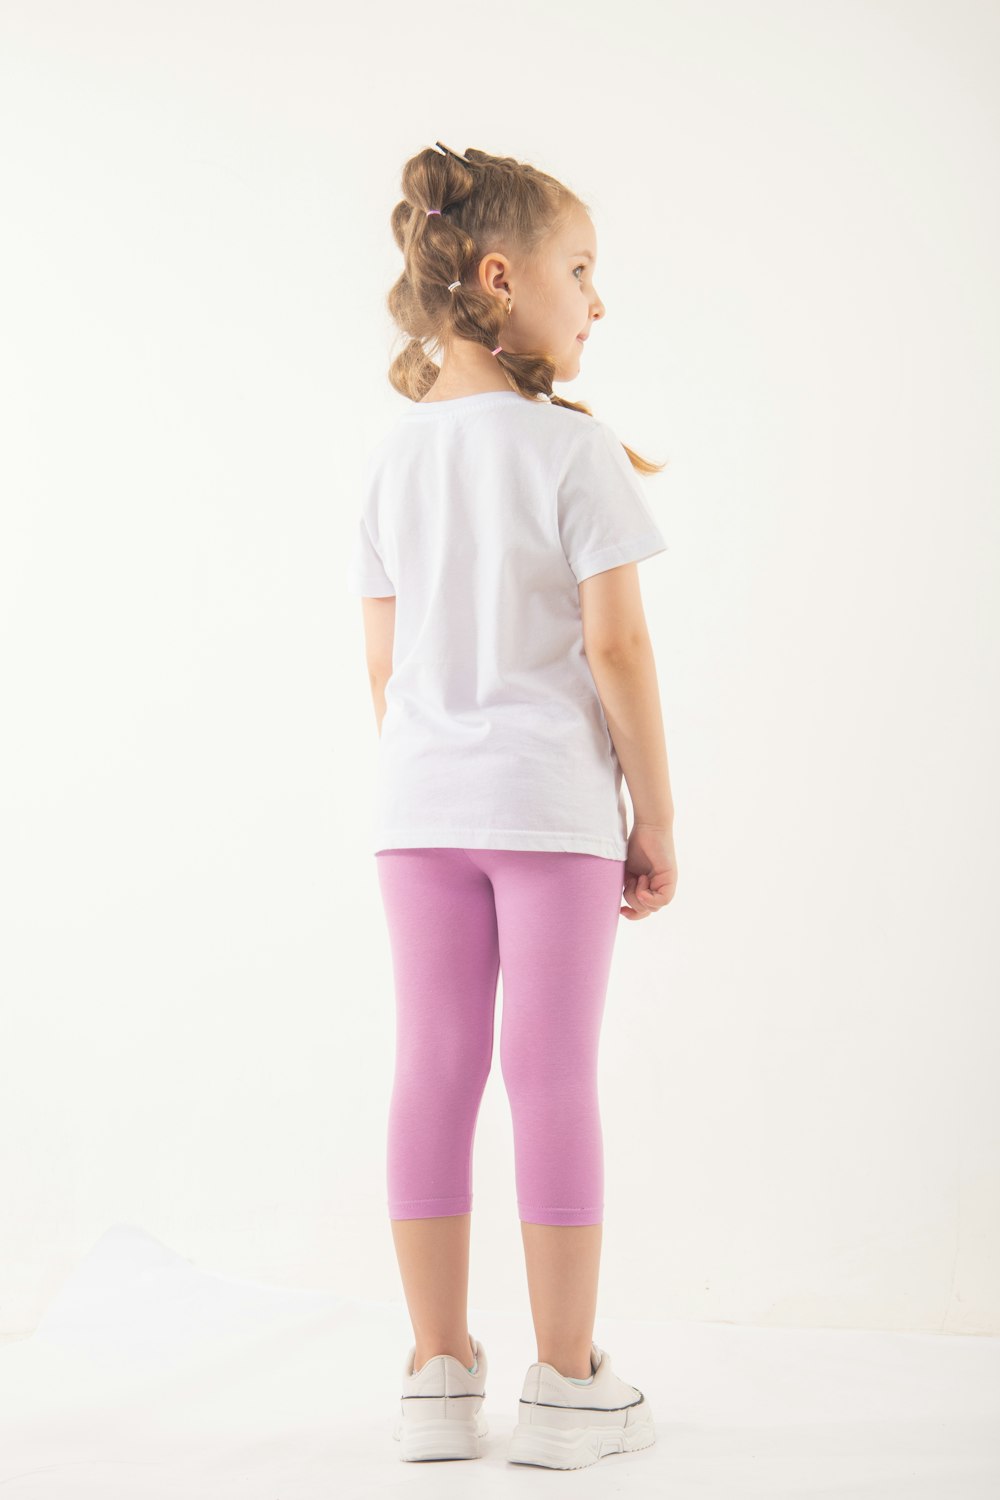 A little girl in a white shirt and pink leggings photo – Free